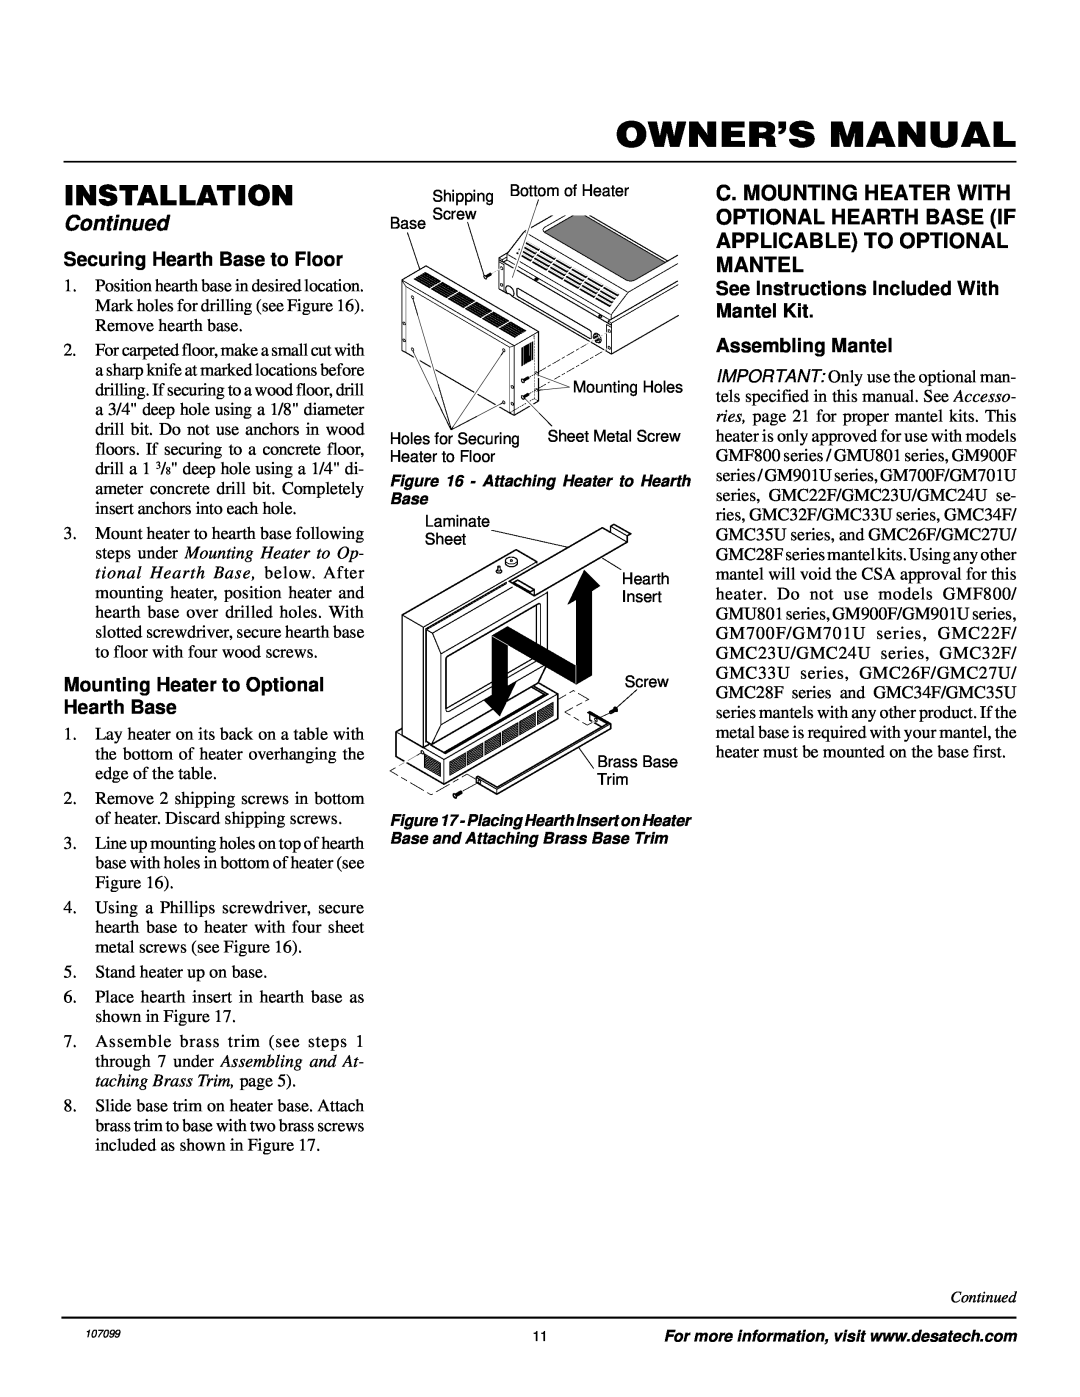 Desa RFN30TA Securing Hearth Base to Floor, Mounting Heater to Optional Hearth Base, Assembling Mantel, Installation 